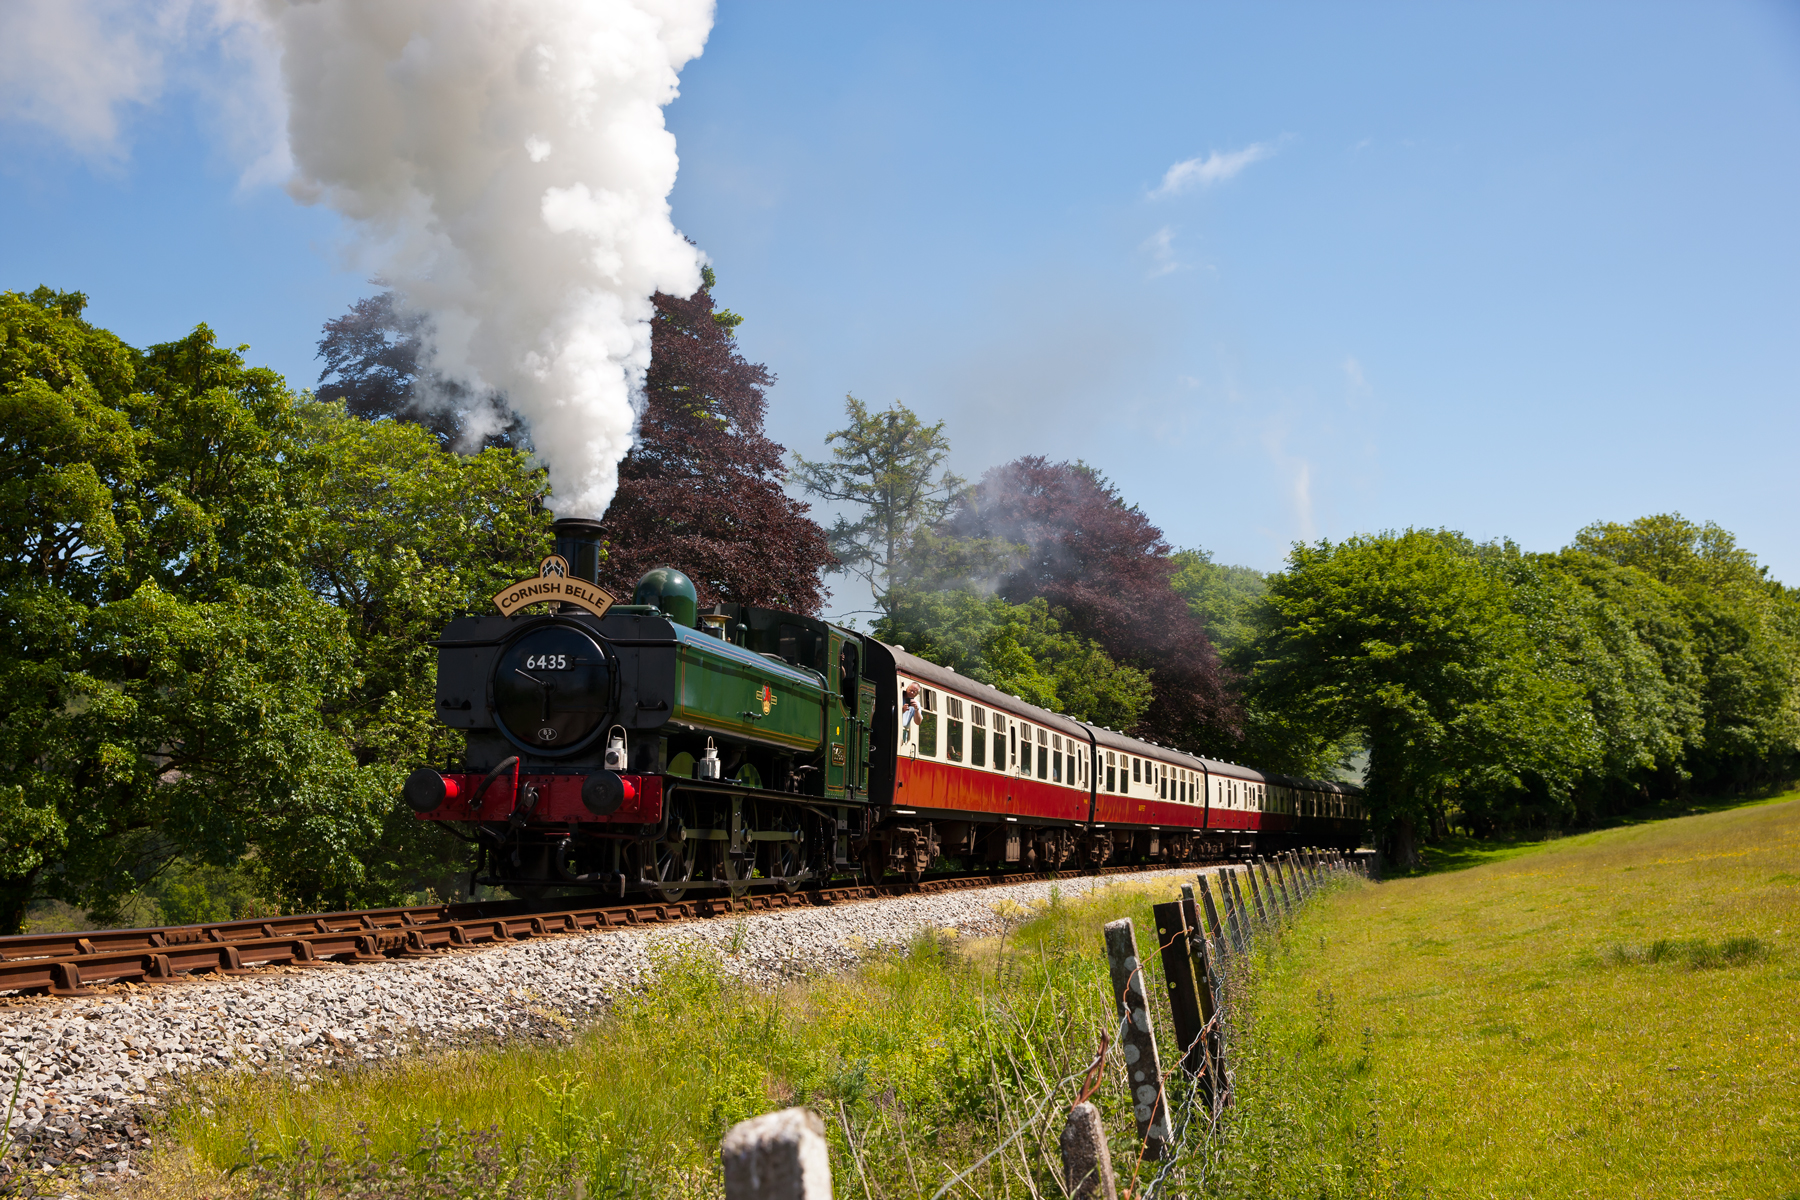 History of the line - Bodmin & Wenford Railway